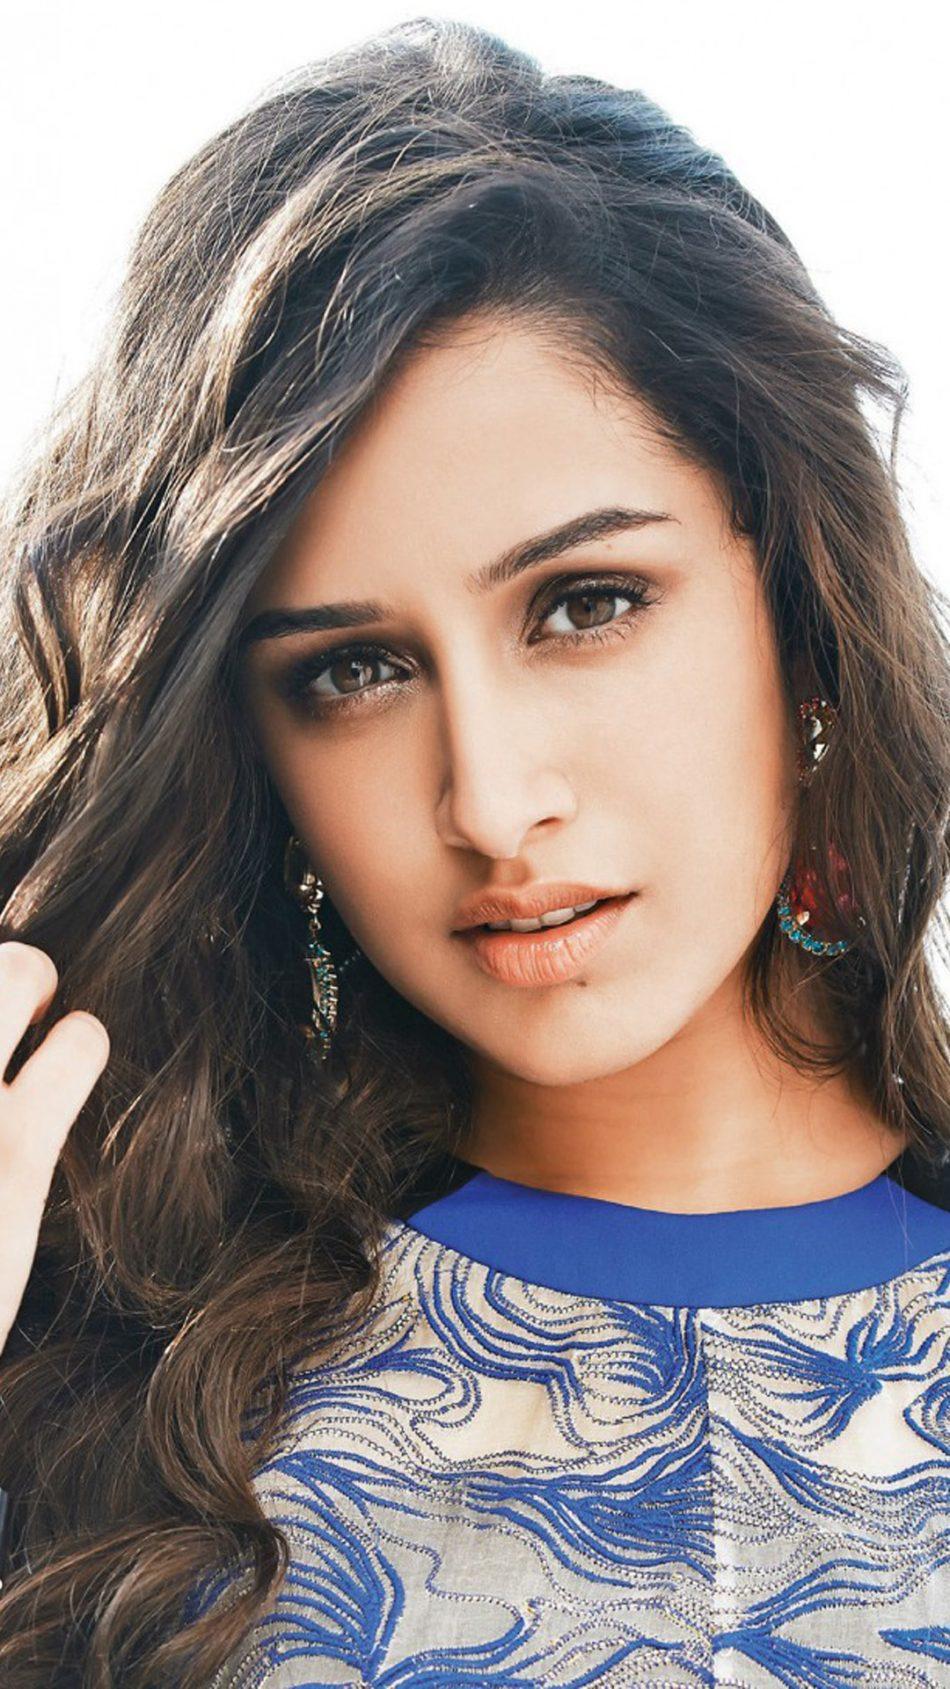 New 85+ Shraddha Kapoor HD Wallpapers For PC